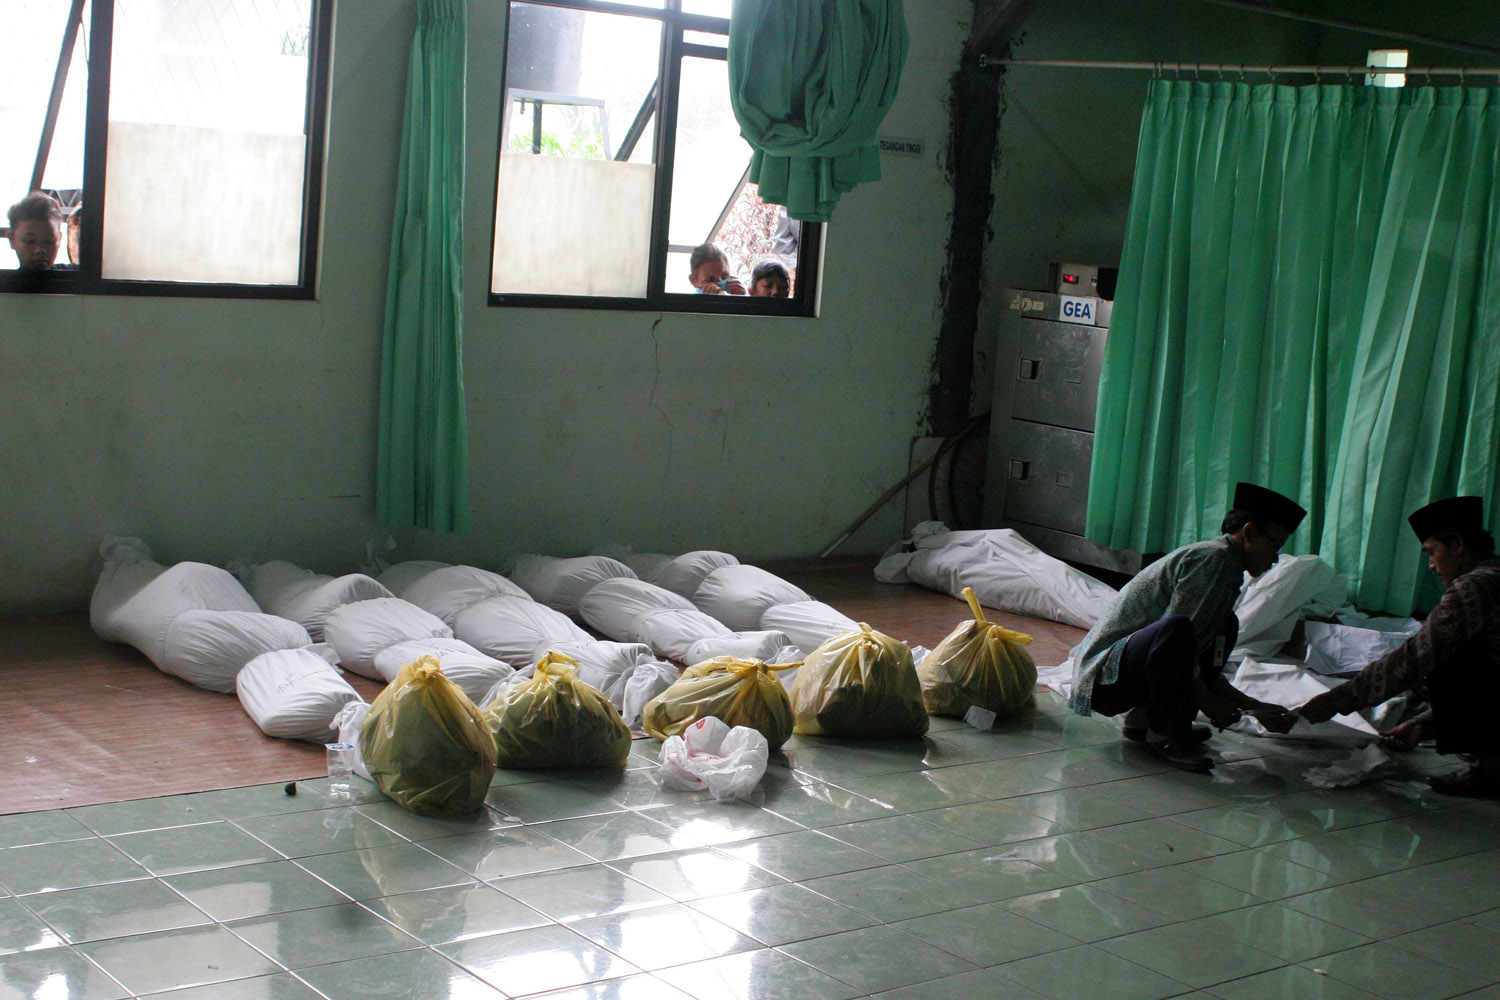 Feb. 23, 2013. Men wrap the bodies of victims of a traffic accident at the Cianjur hospital in Cianjur, Indonesia.